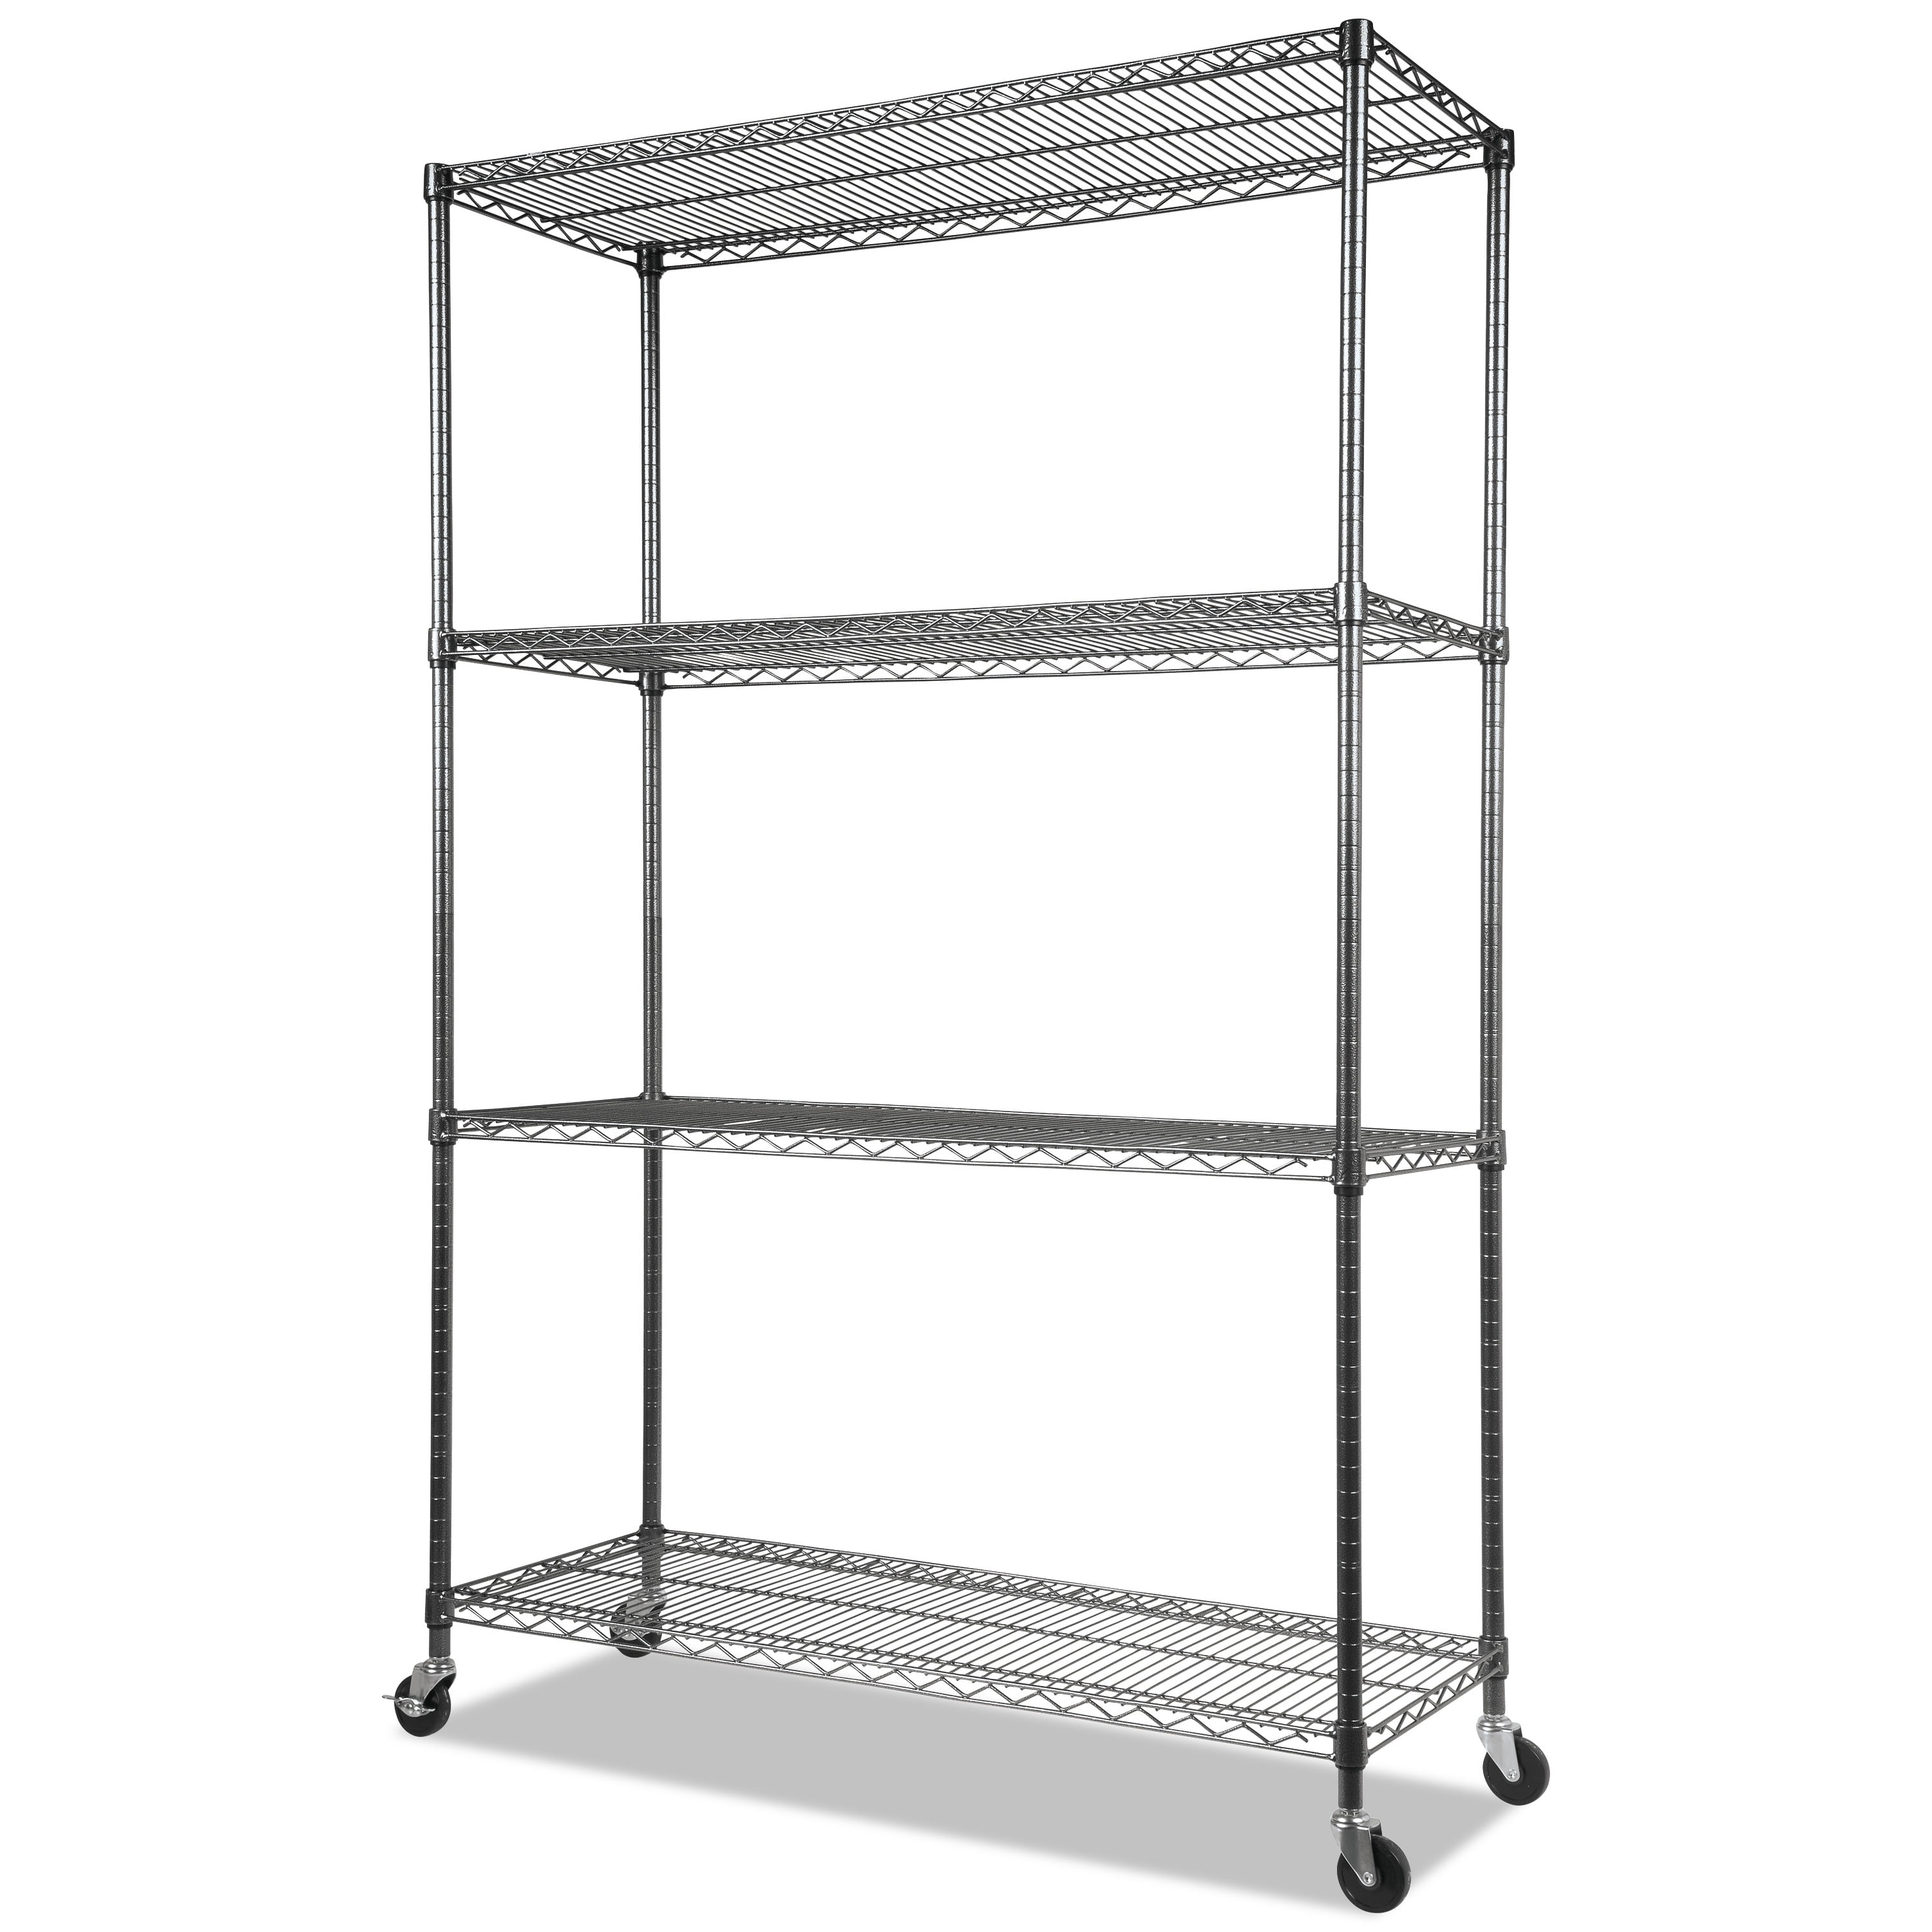 Wire Shelving Unit With Casters, 4 Pack Caster Wheels For Wire Shelving Units